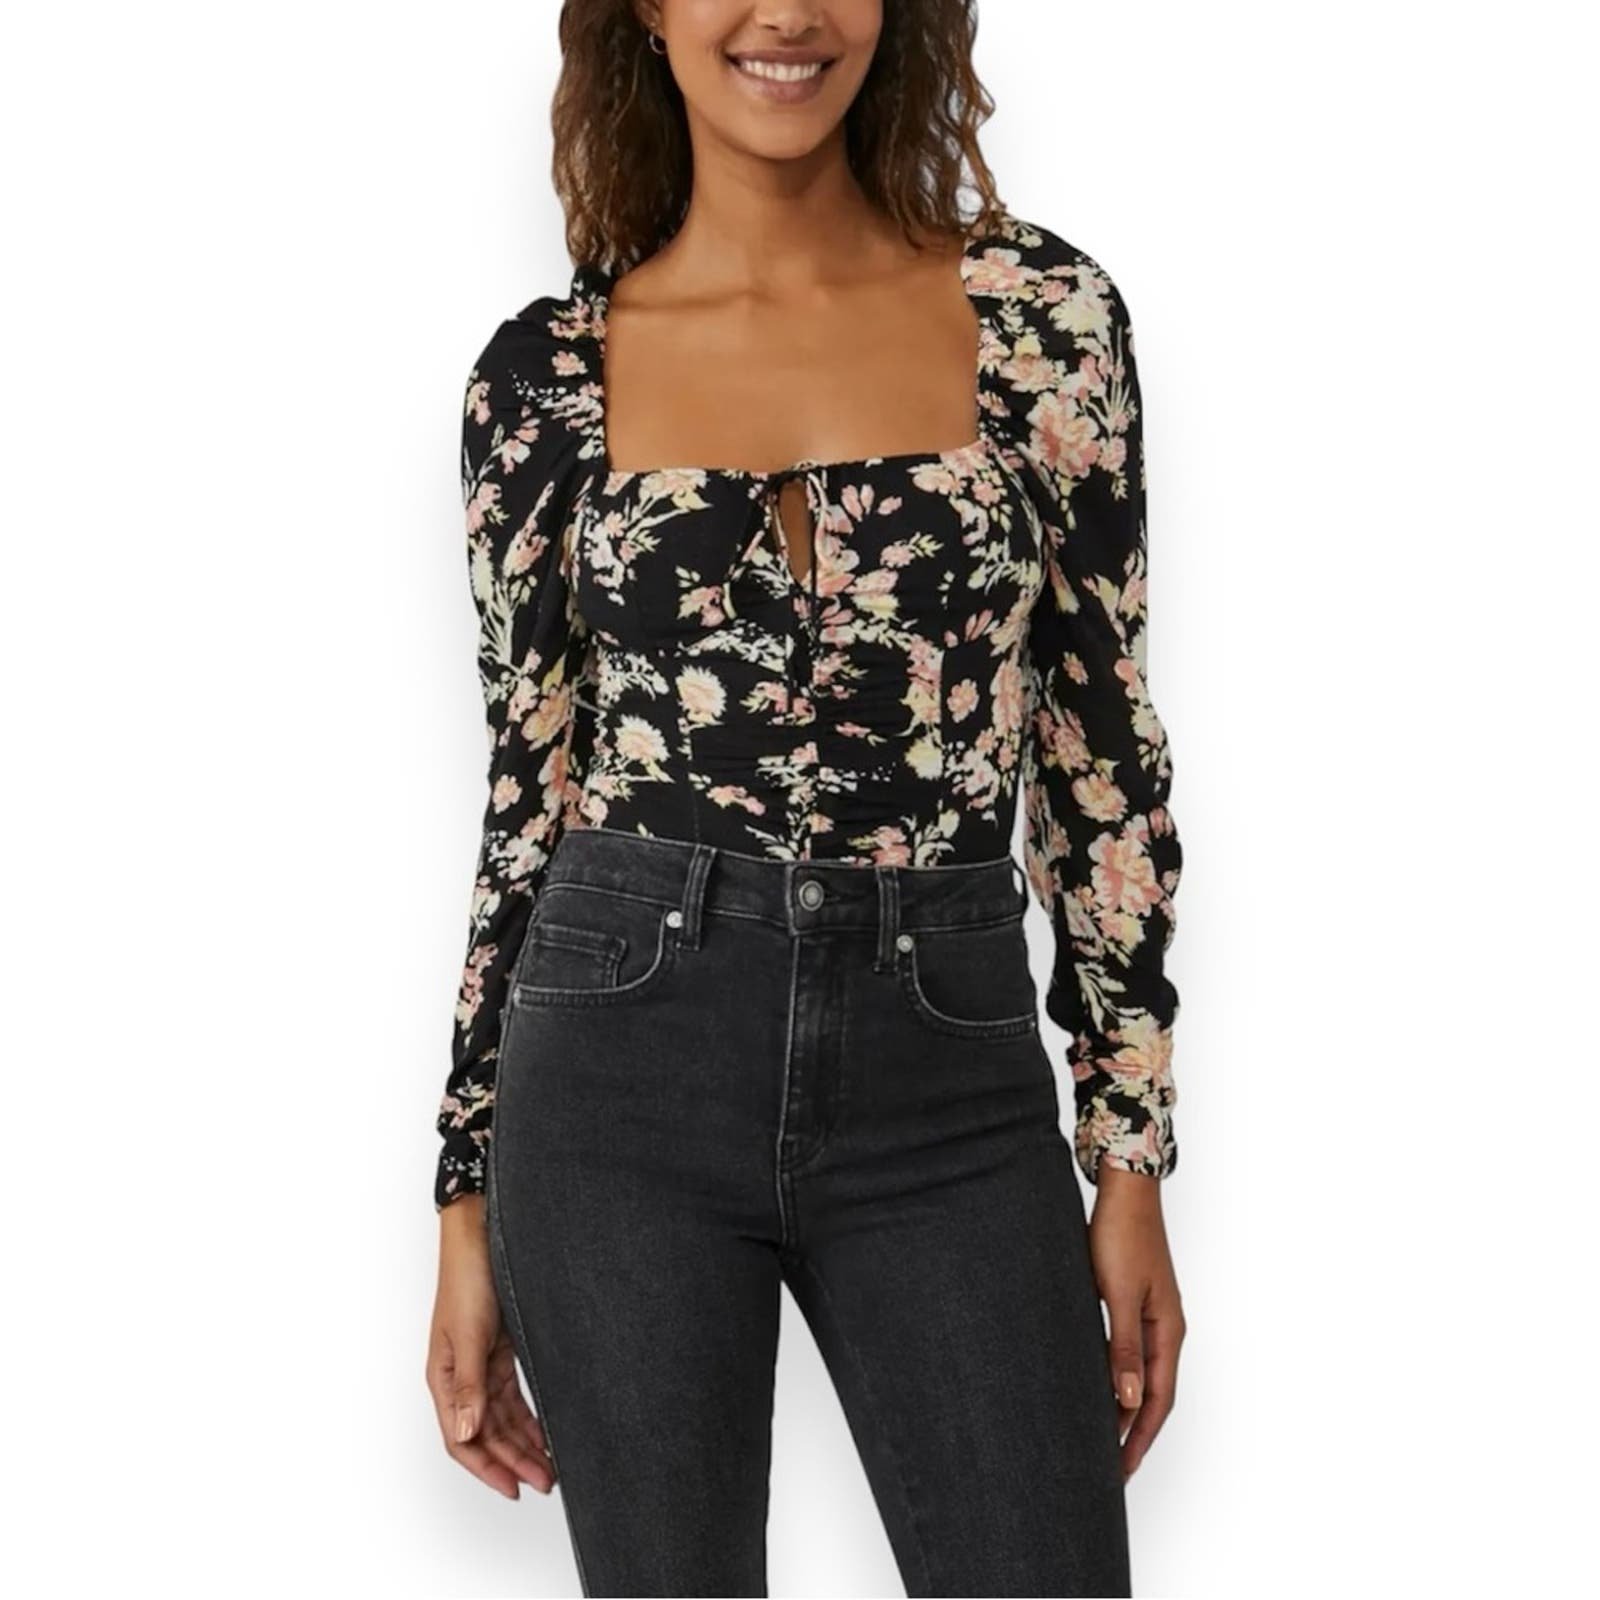 Fashion Free People Hilary Black Multicolor Floral Prin